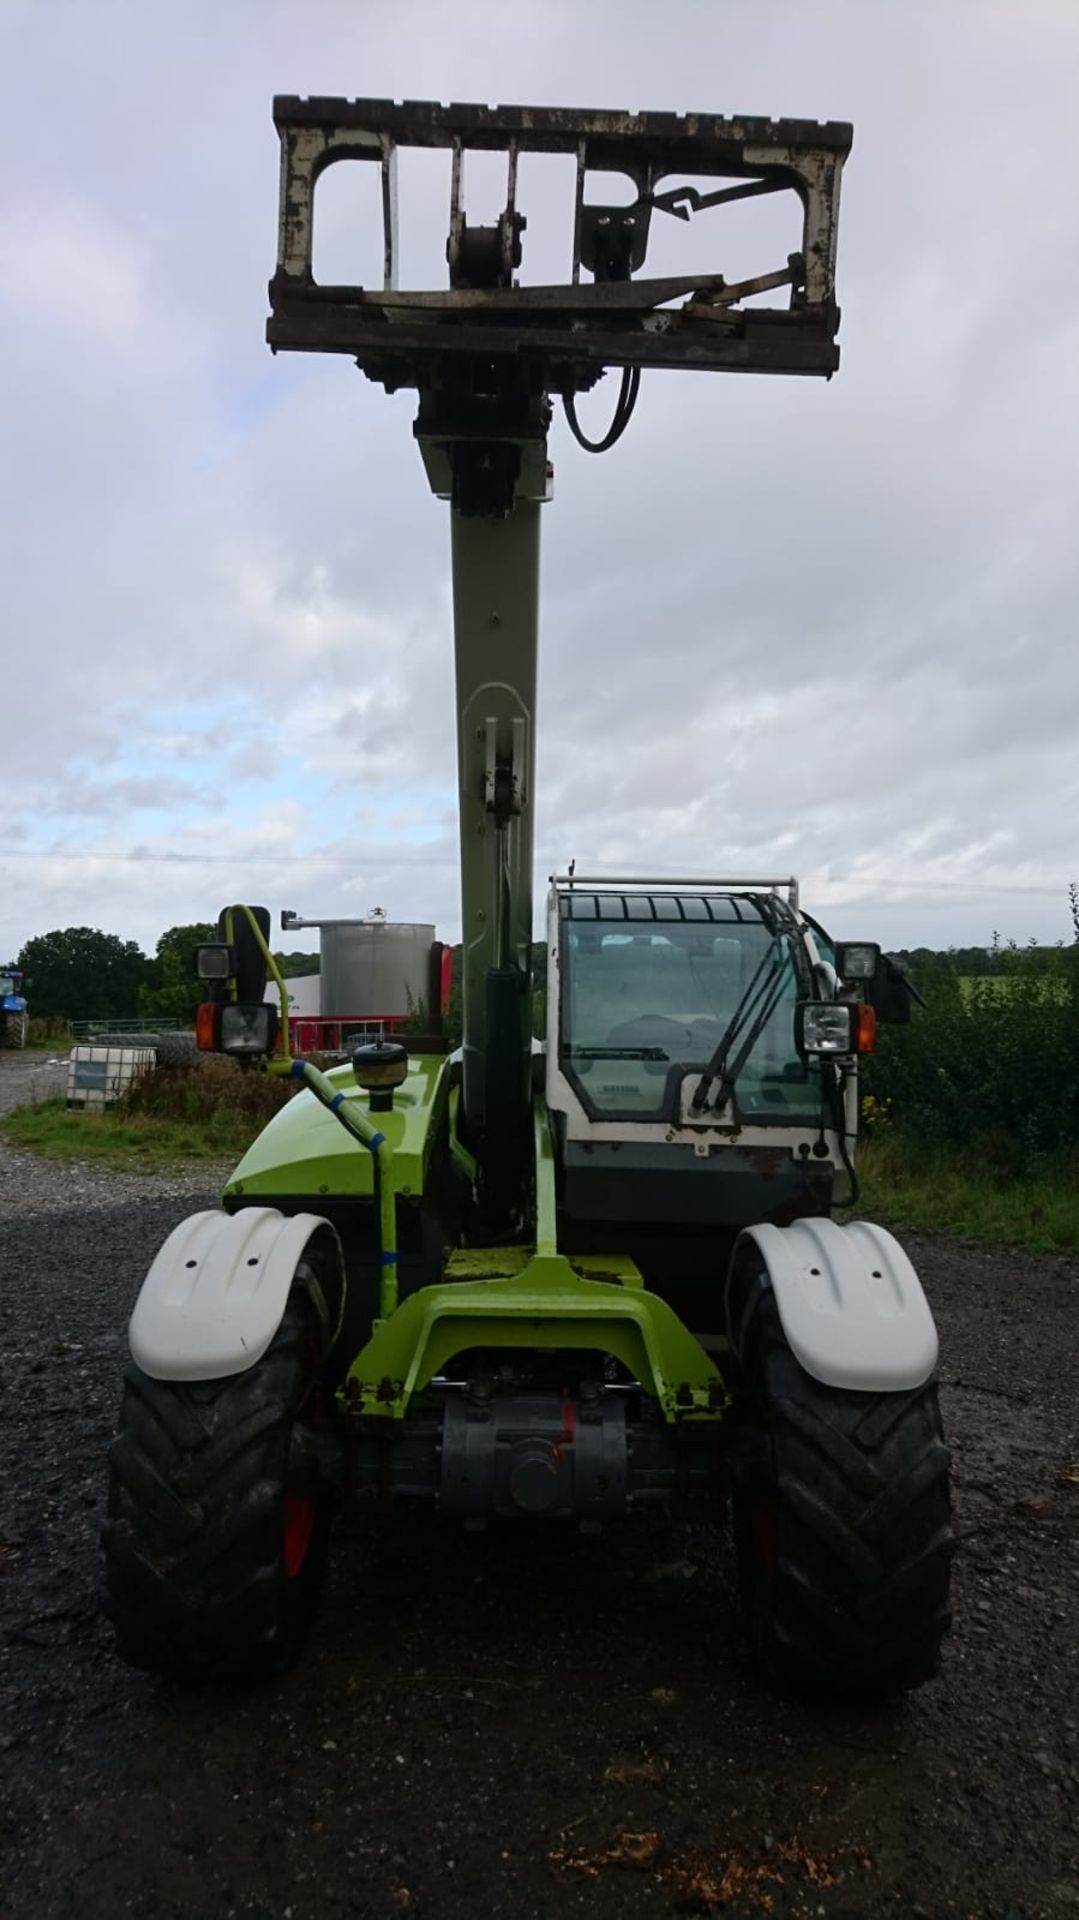 CLAAS TARGO C50 LOADER 8990 hrs (clock stopped recently) DX54 XPO - Bild 4 aus 7